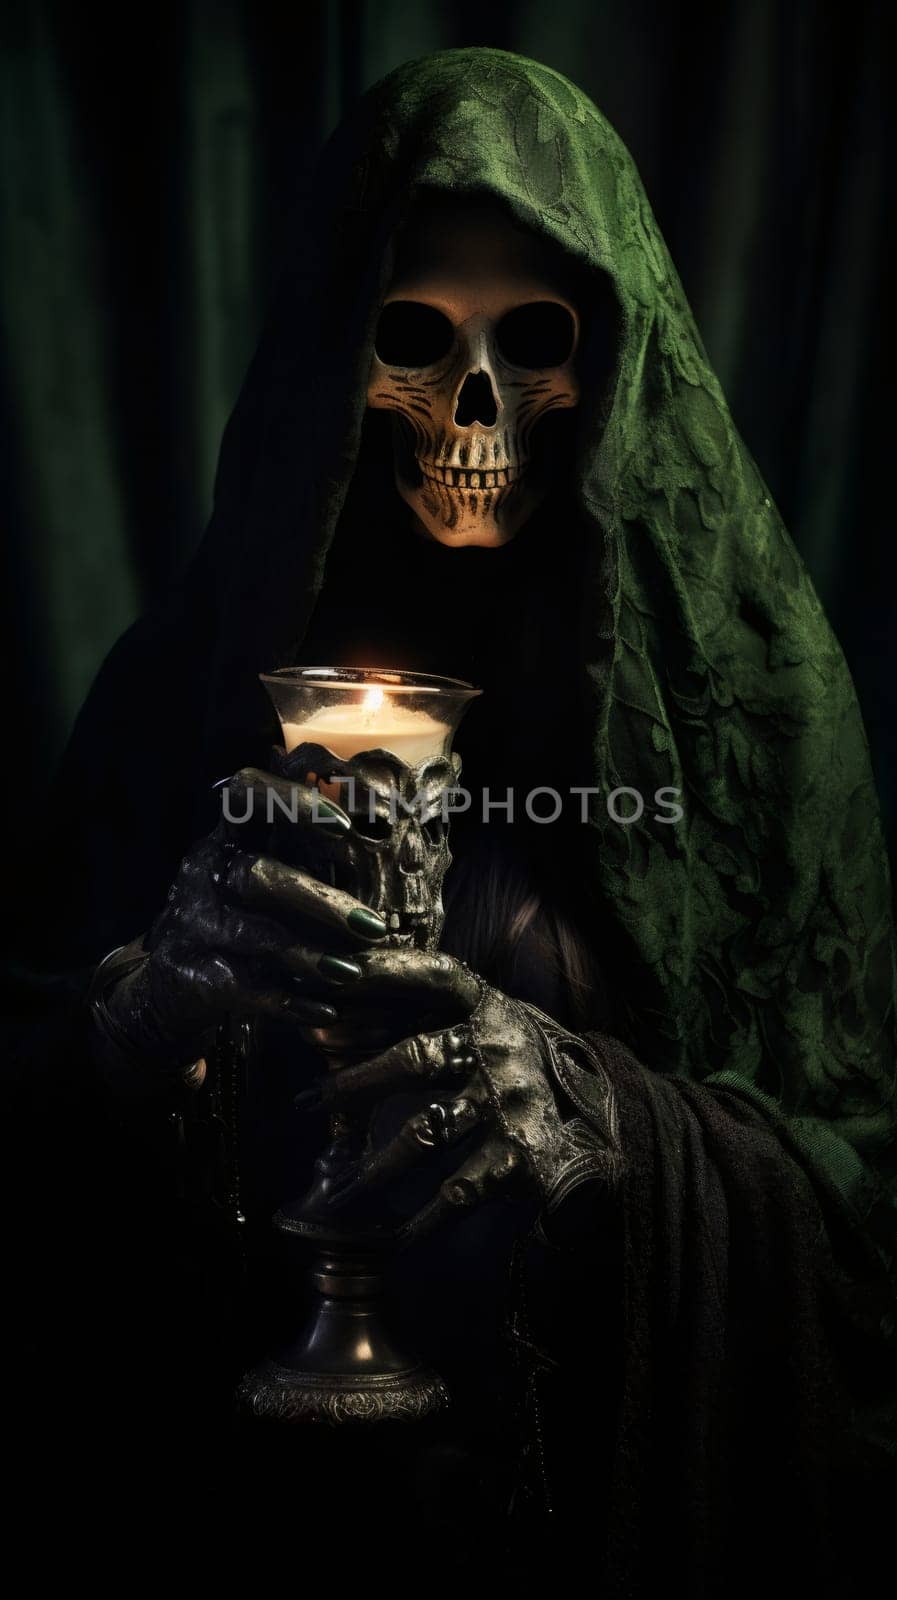 One male sorcerer in a skull mask, a green robe with a hood holds in iron hands an ancient glass with a candle burning in it, stands in a dark room and ominously looks at the camera, close-up side view.